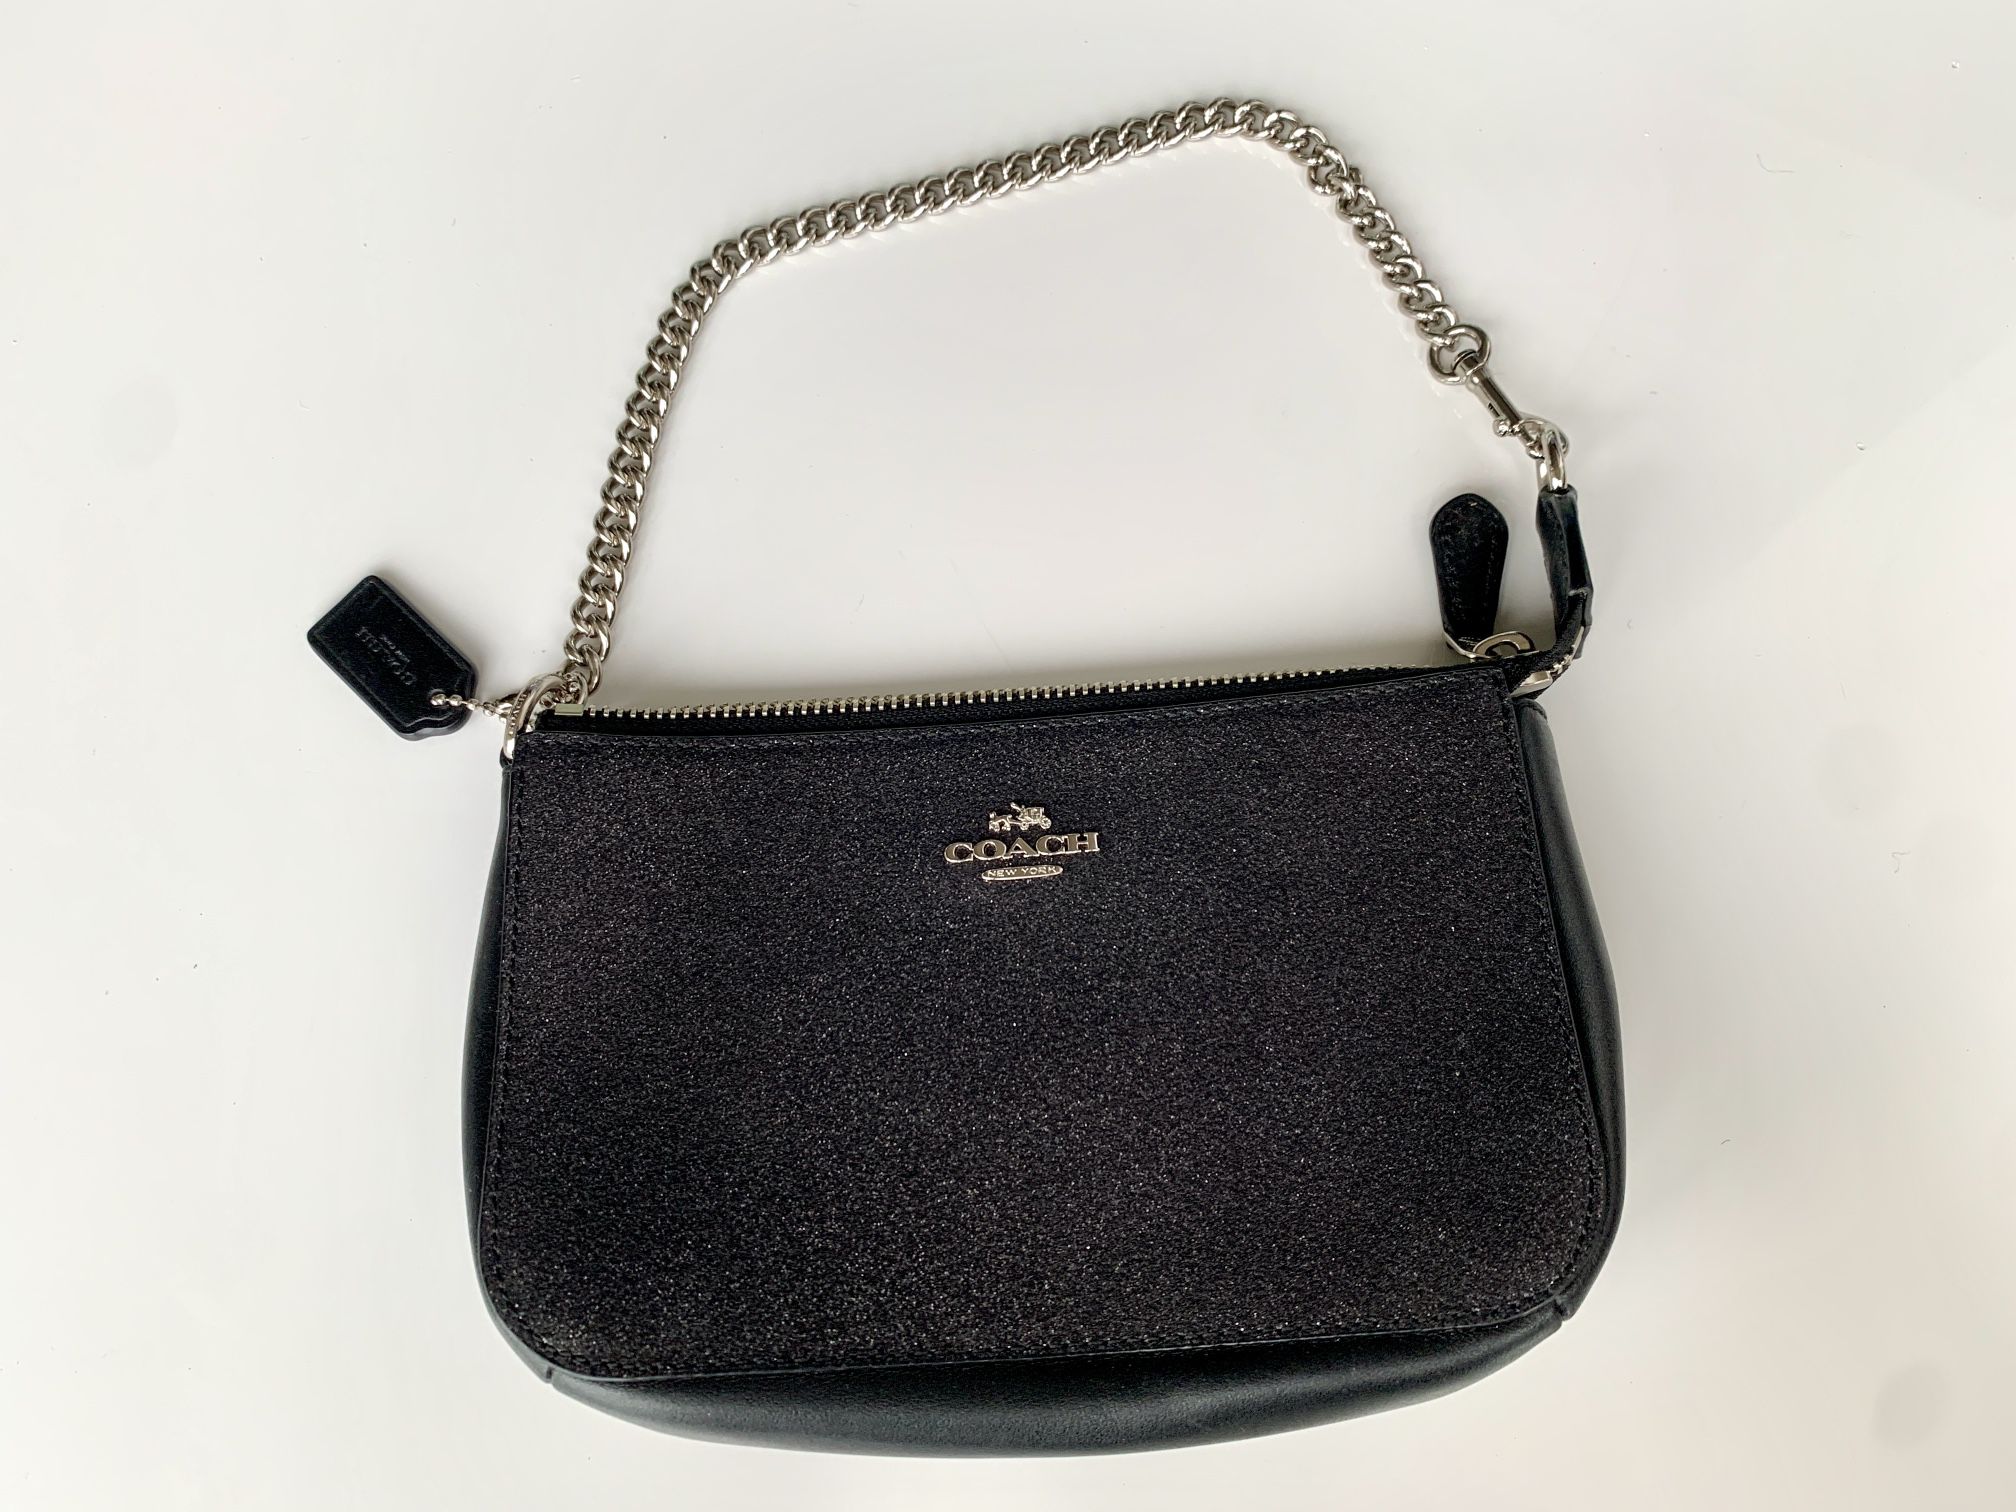 Rare Find, Like New COACH Black Glitter and Silver Chain Shoulder Bag